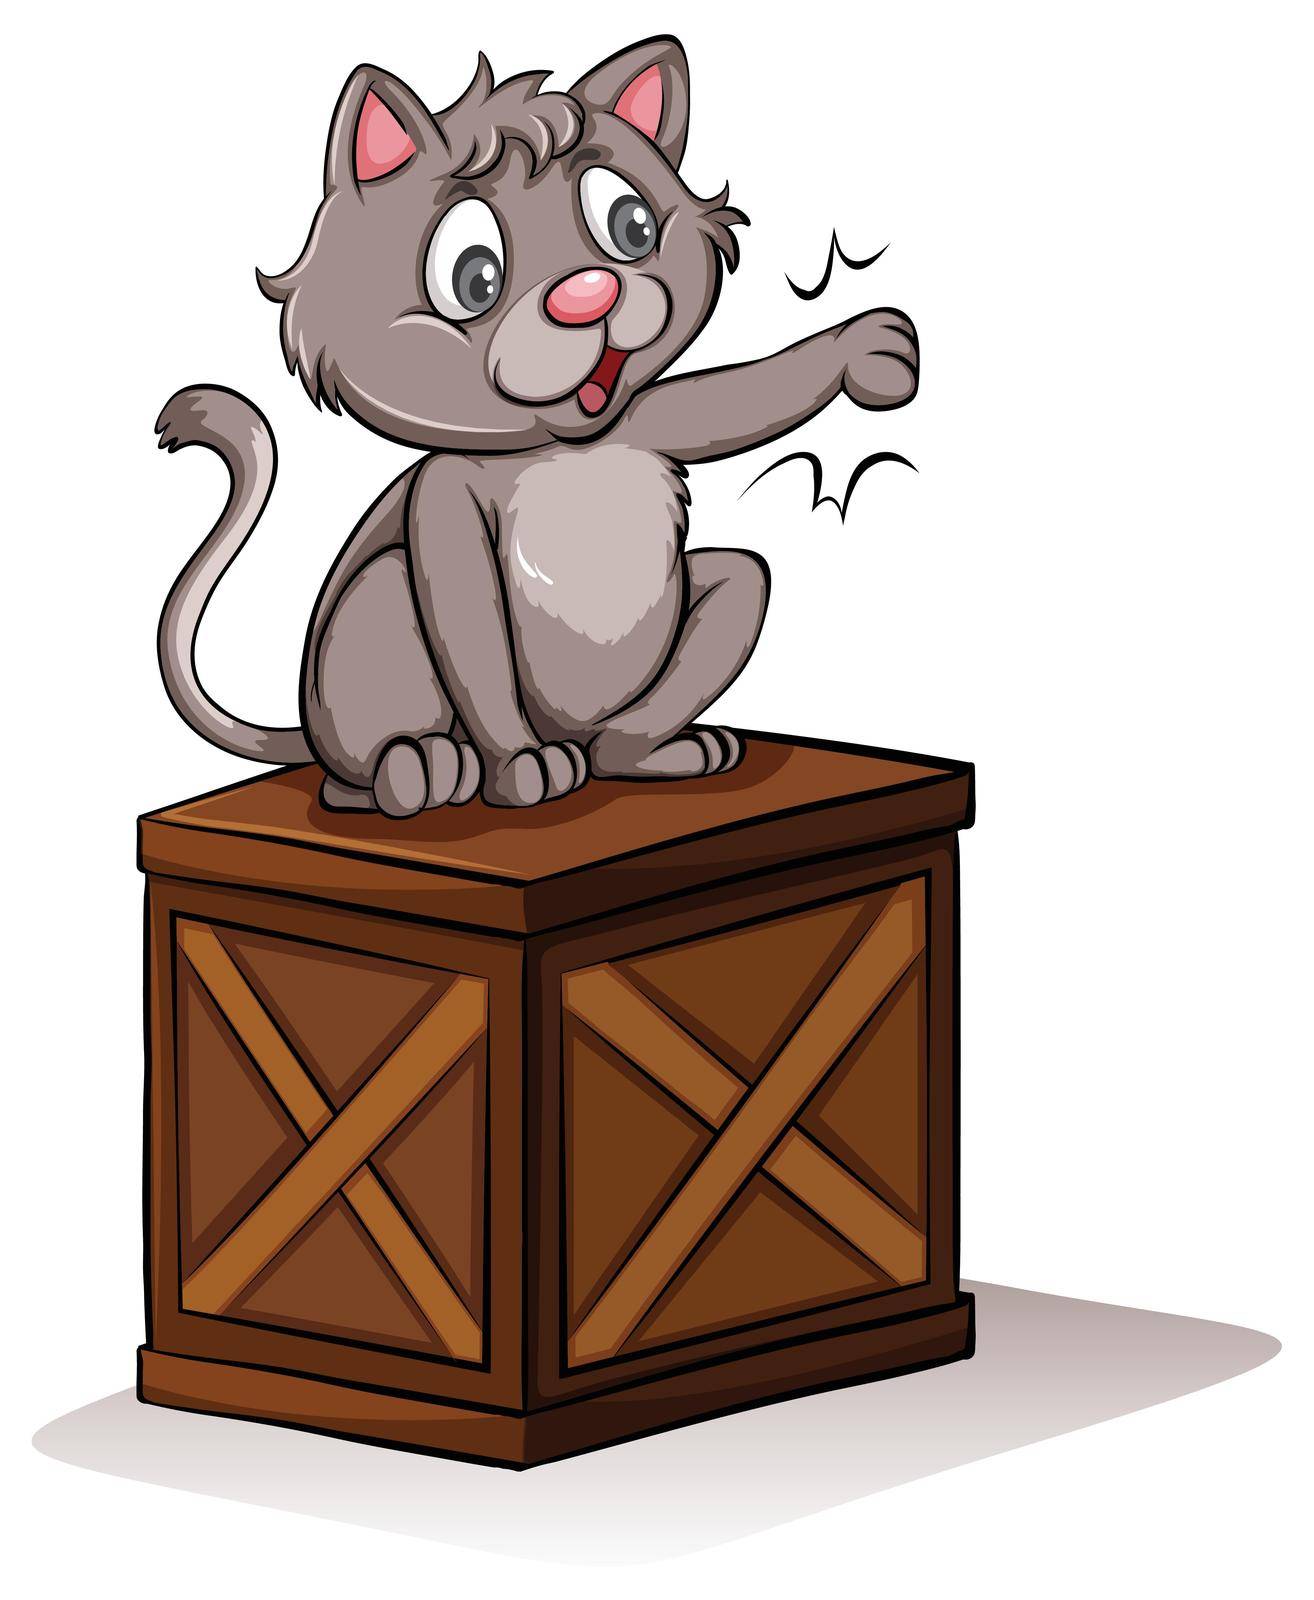 An idiom showing a cat above the box